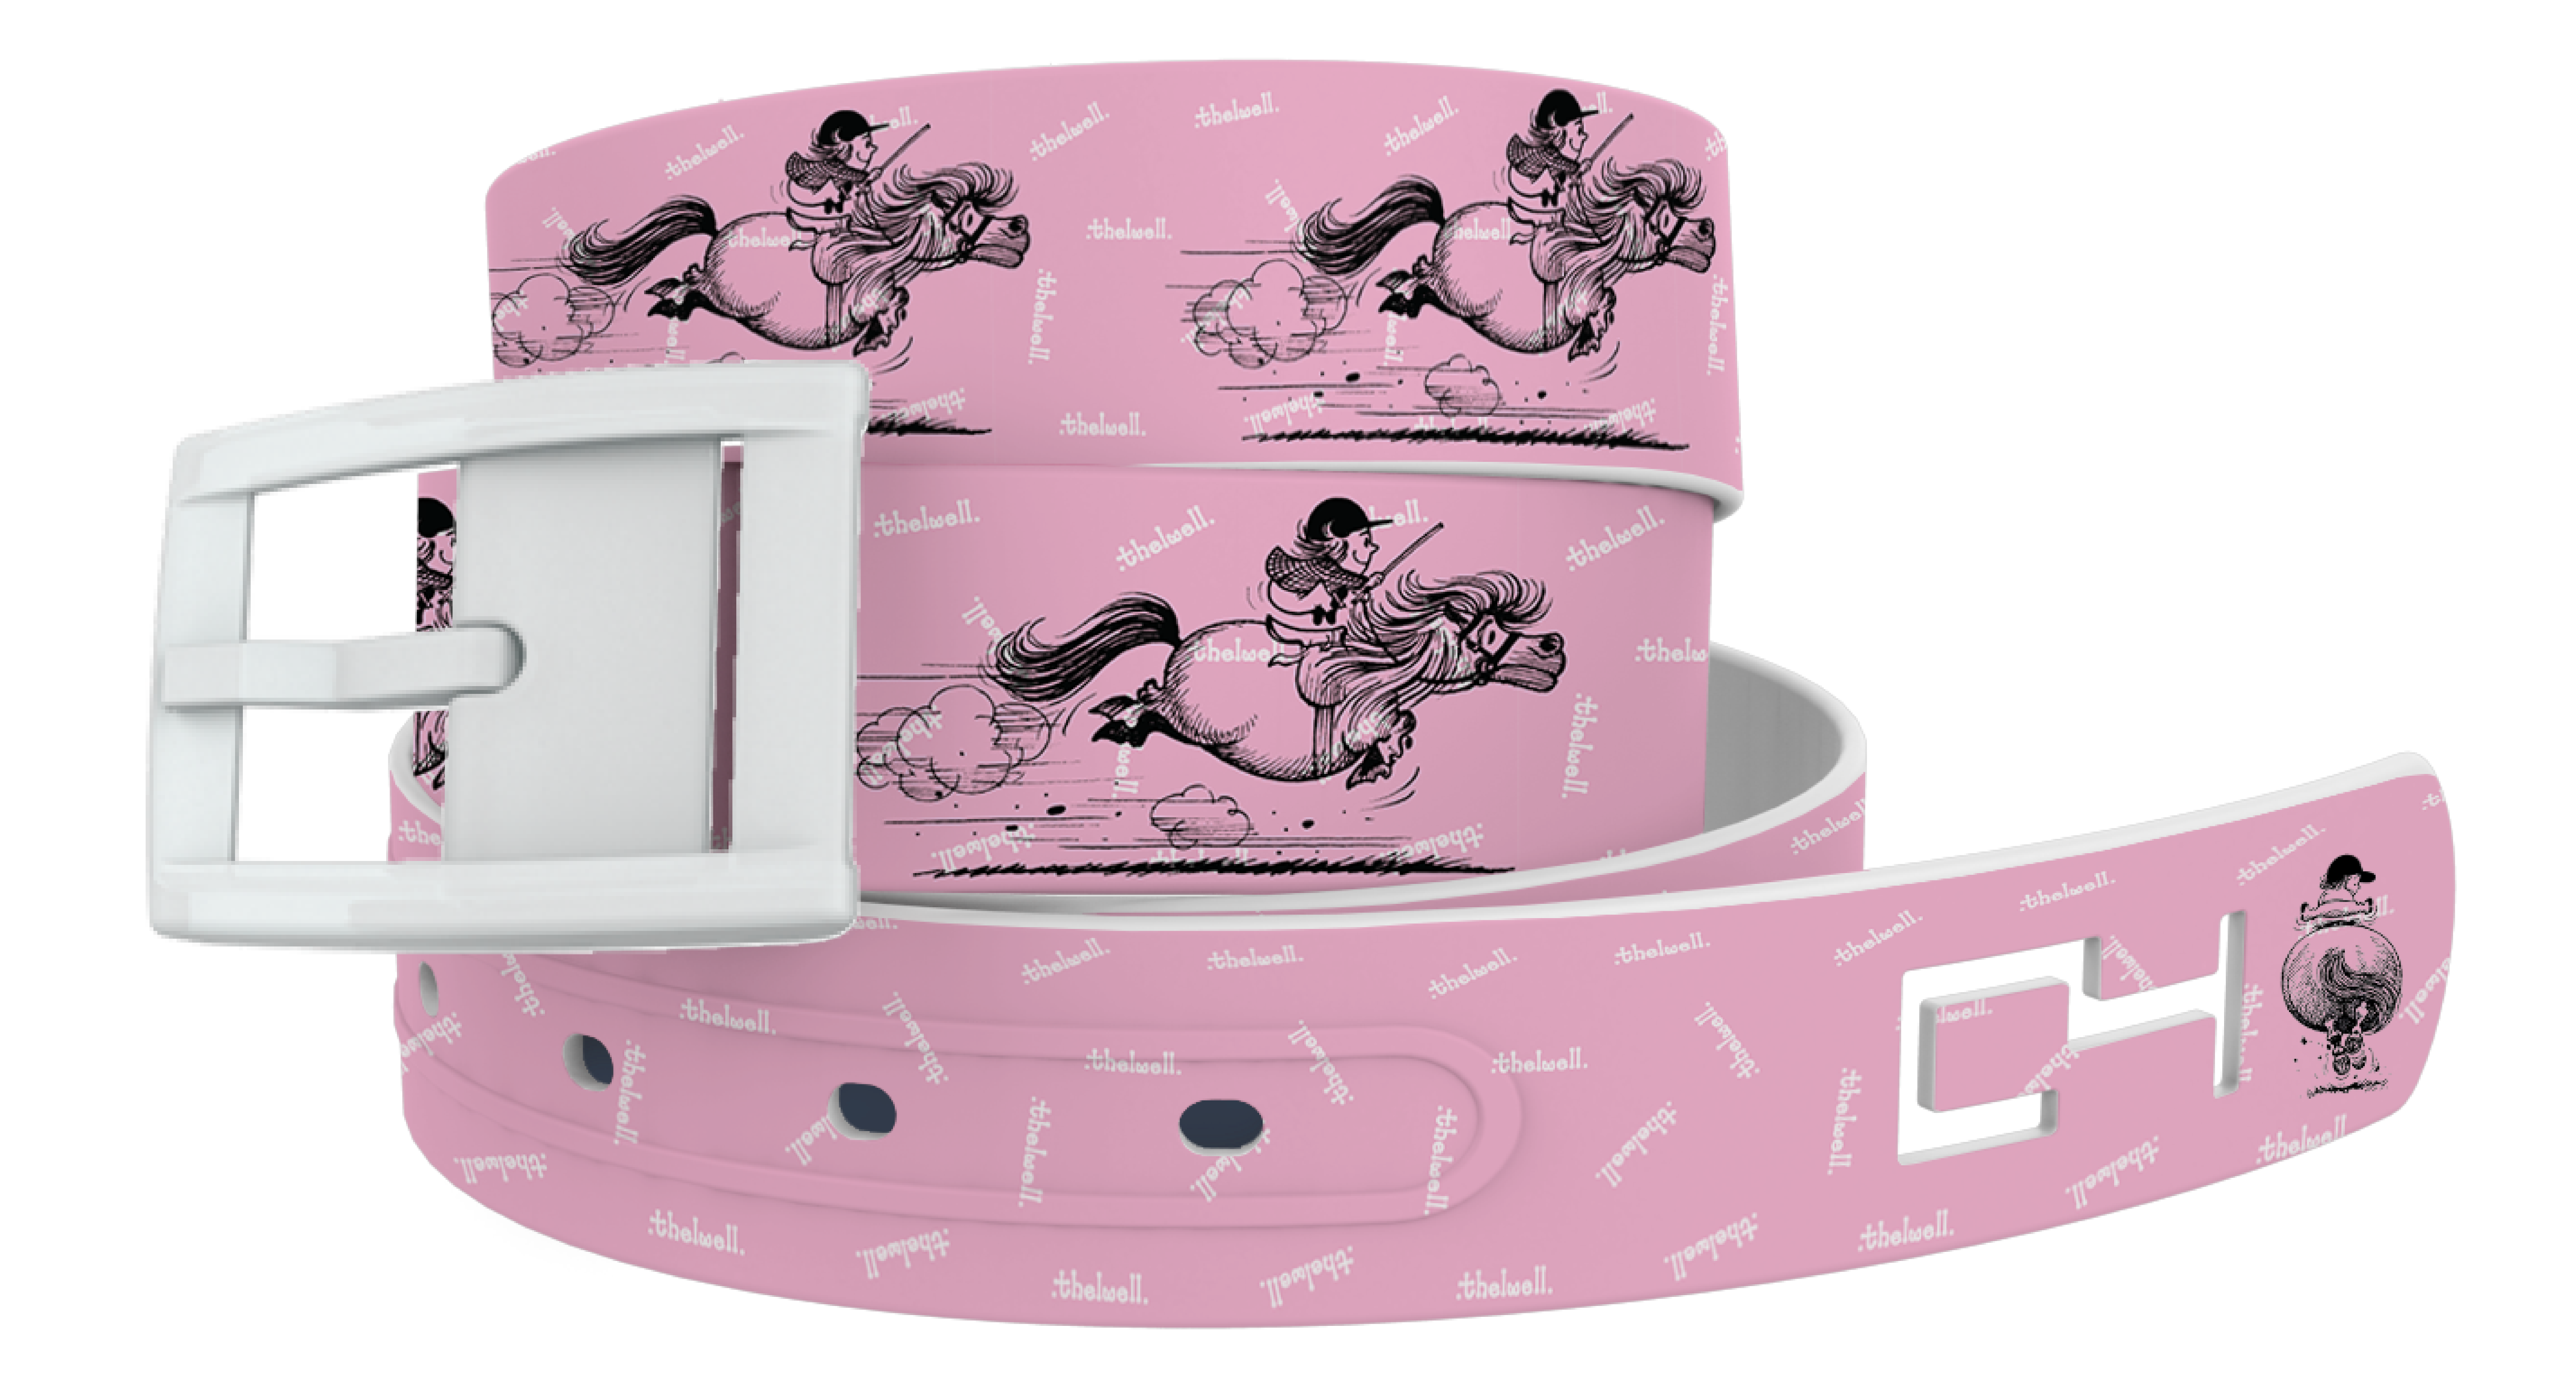 C4 Belt - Thelwell Gallop Pink Belt and Black Buckle